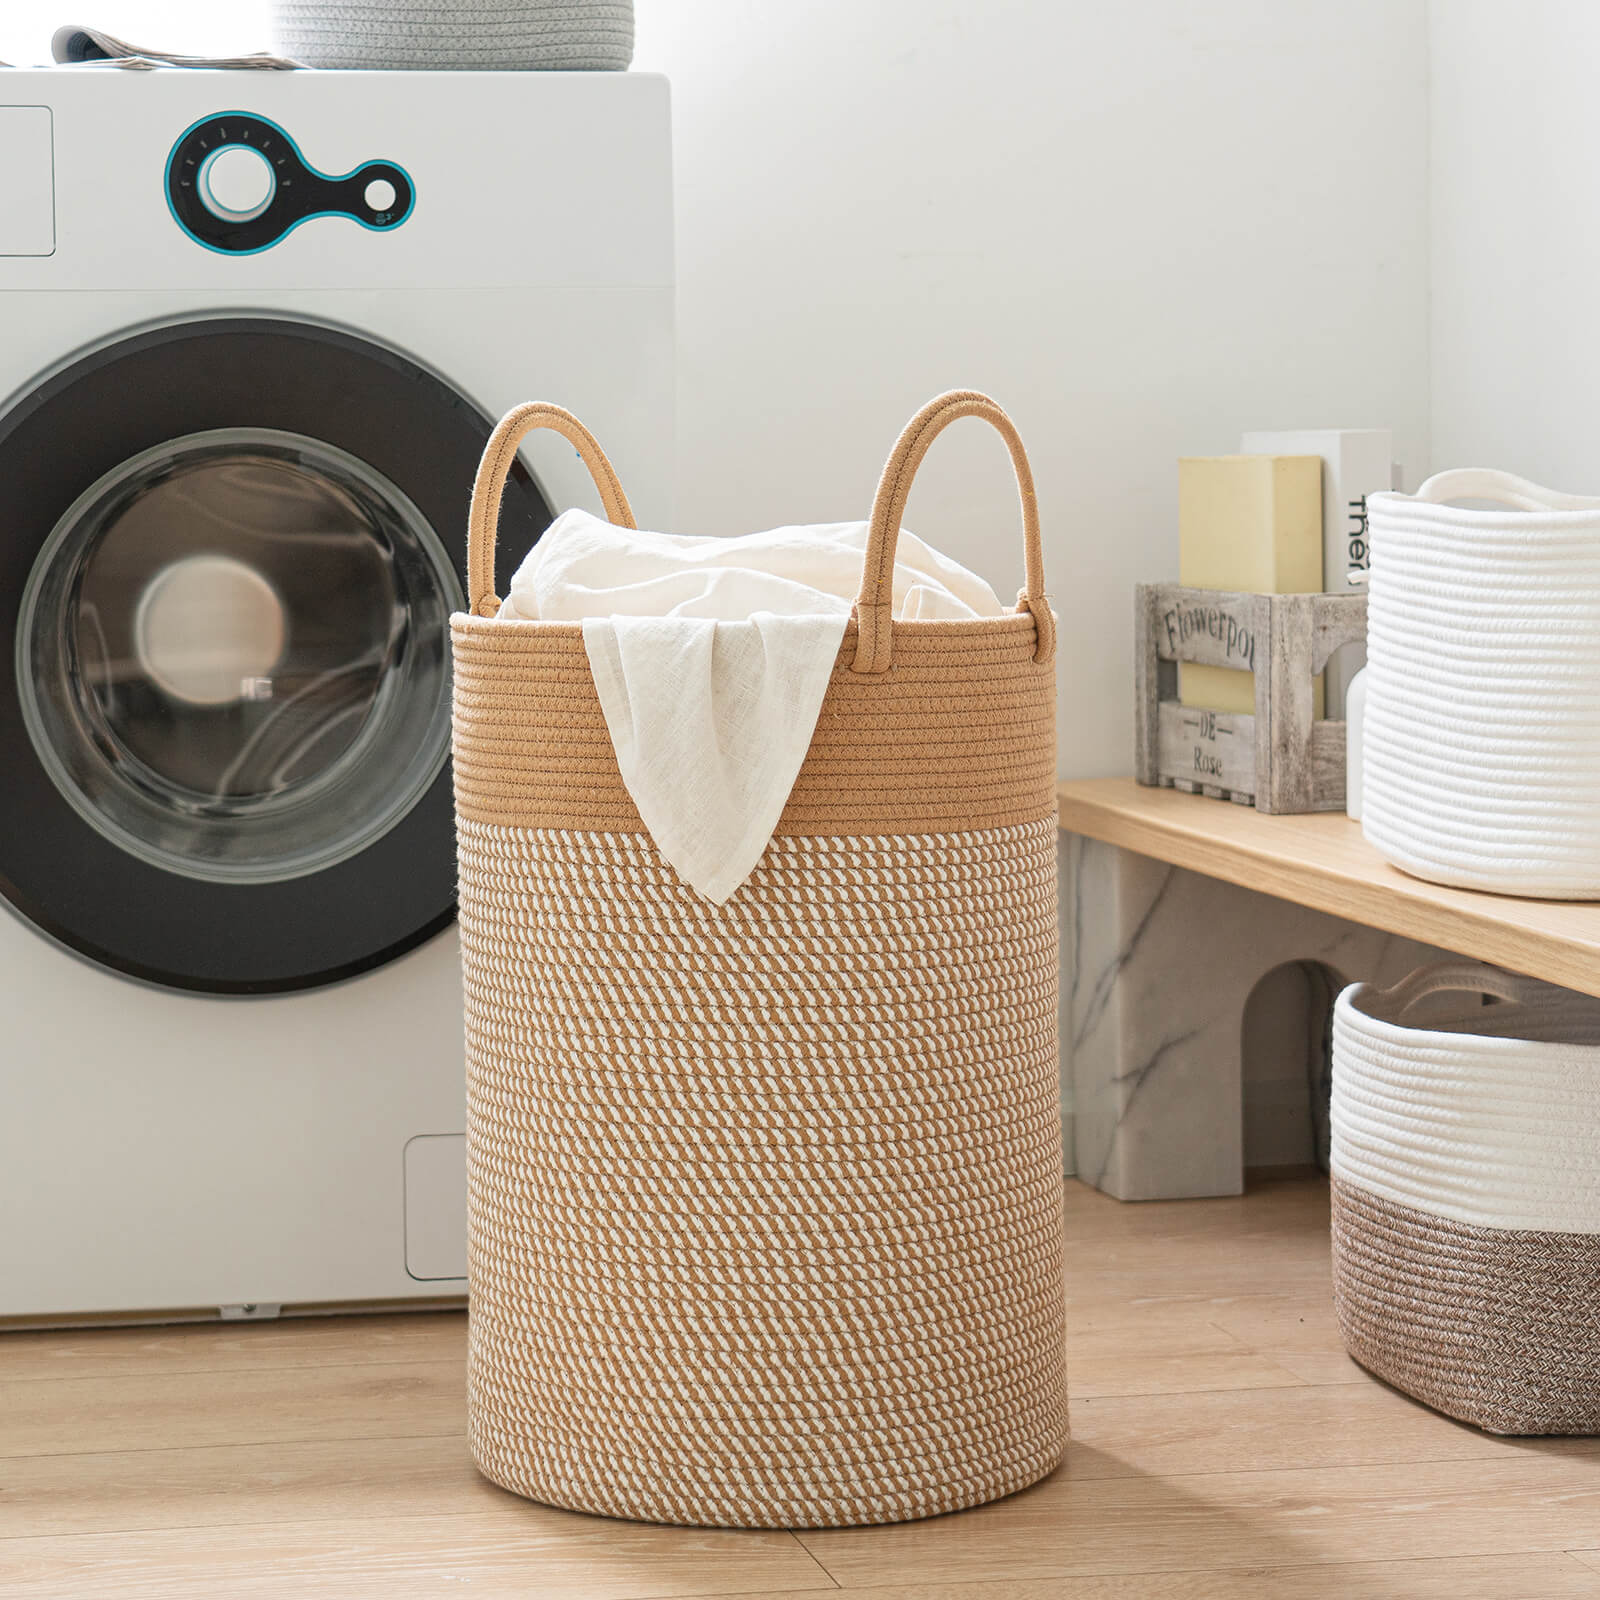 Goodpick Tall Laundry Basket with Handles